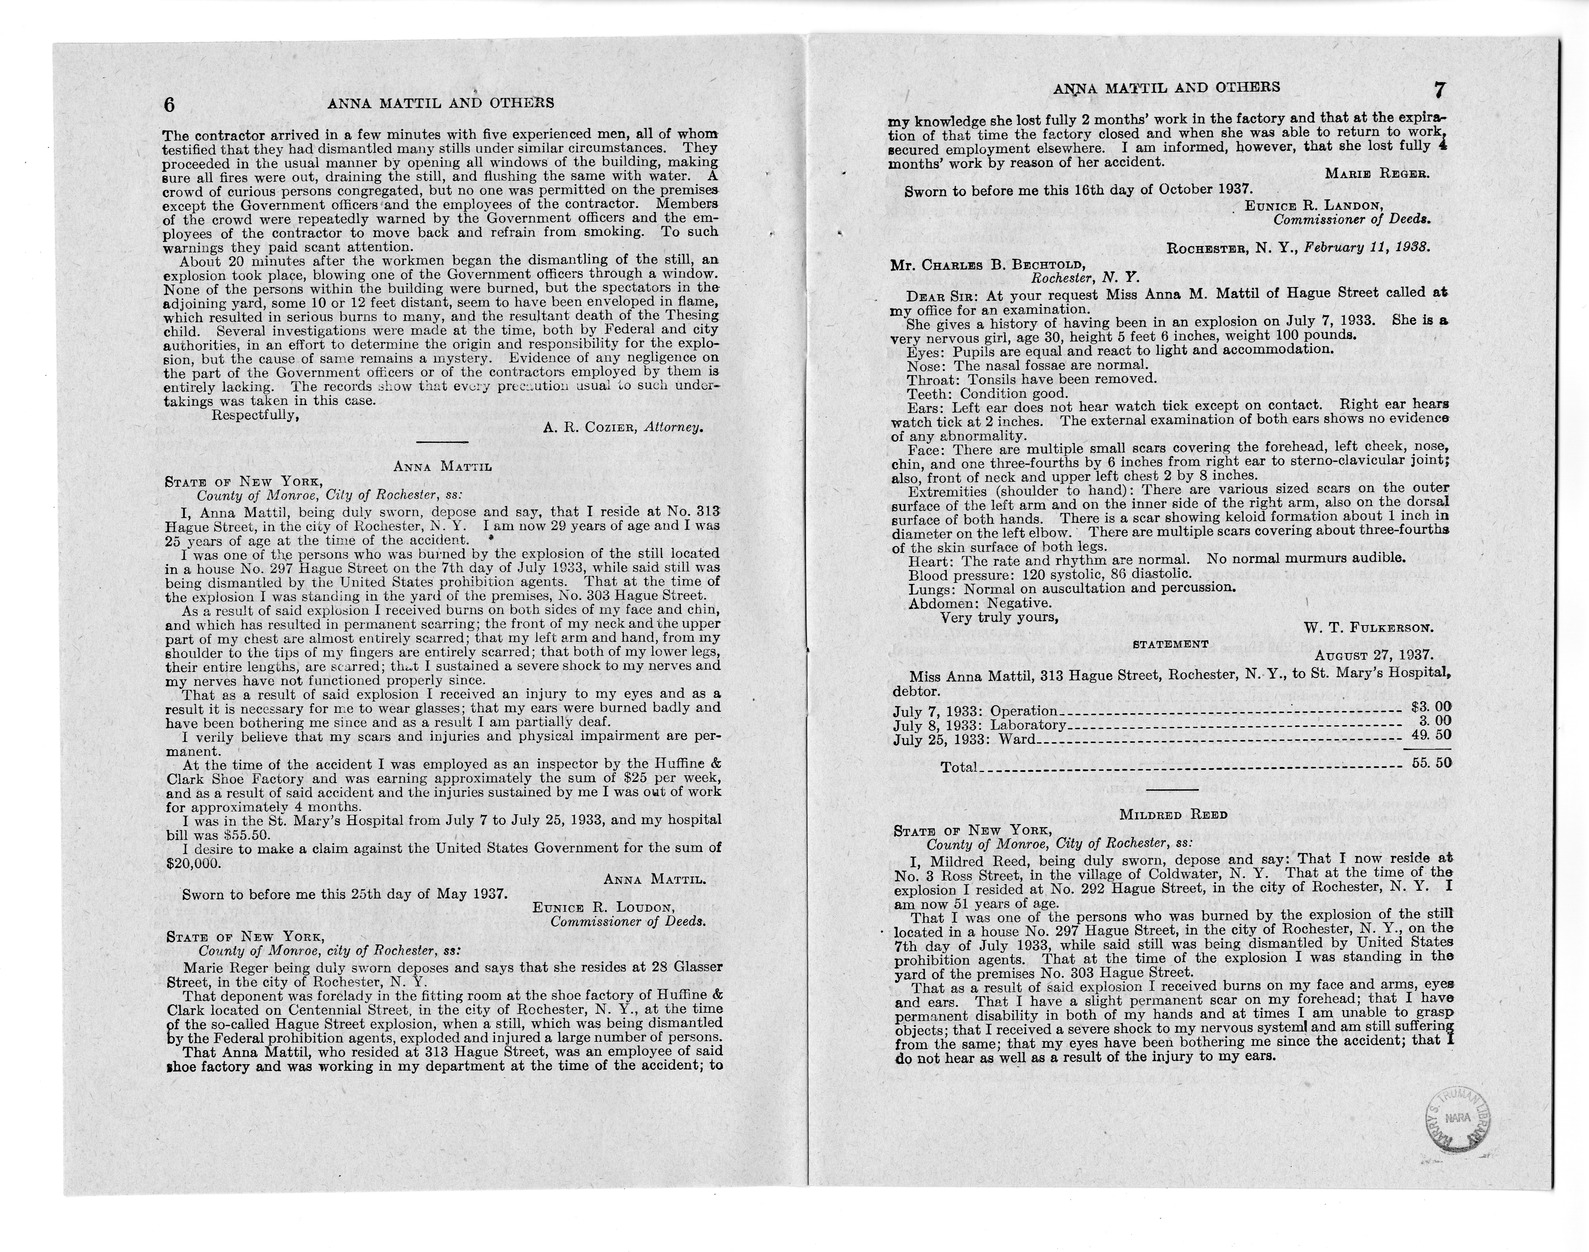 Memorandum from Frederick J. Bailey to M. C. Latta, H.R. 1889, For the Relief of Anna Mattil and Others, with Attachments